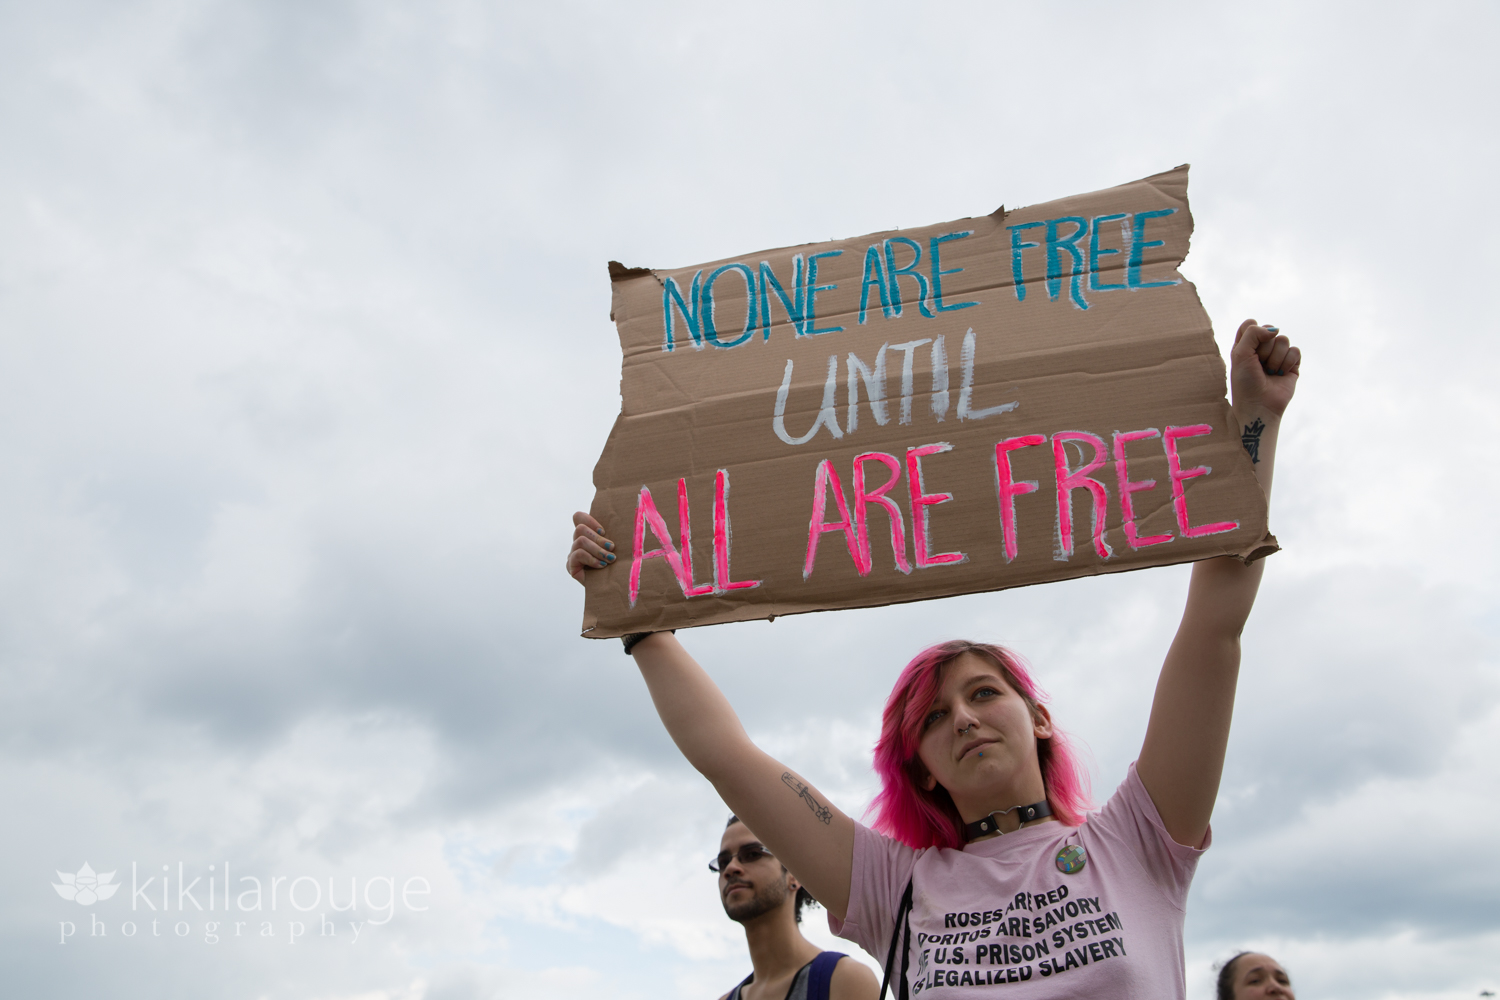 Woman with pink hair and shirt holding ICE protest sign